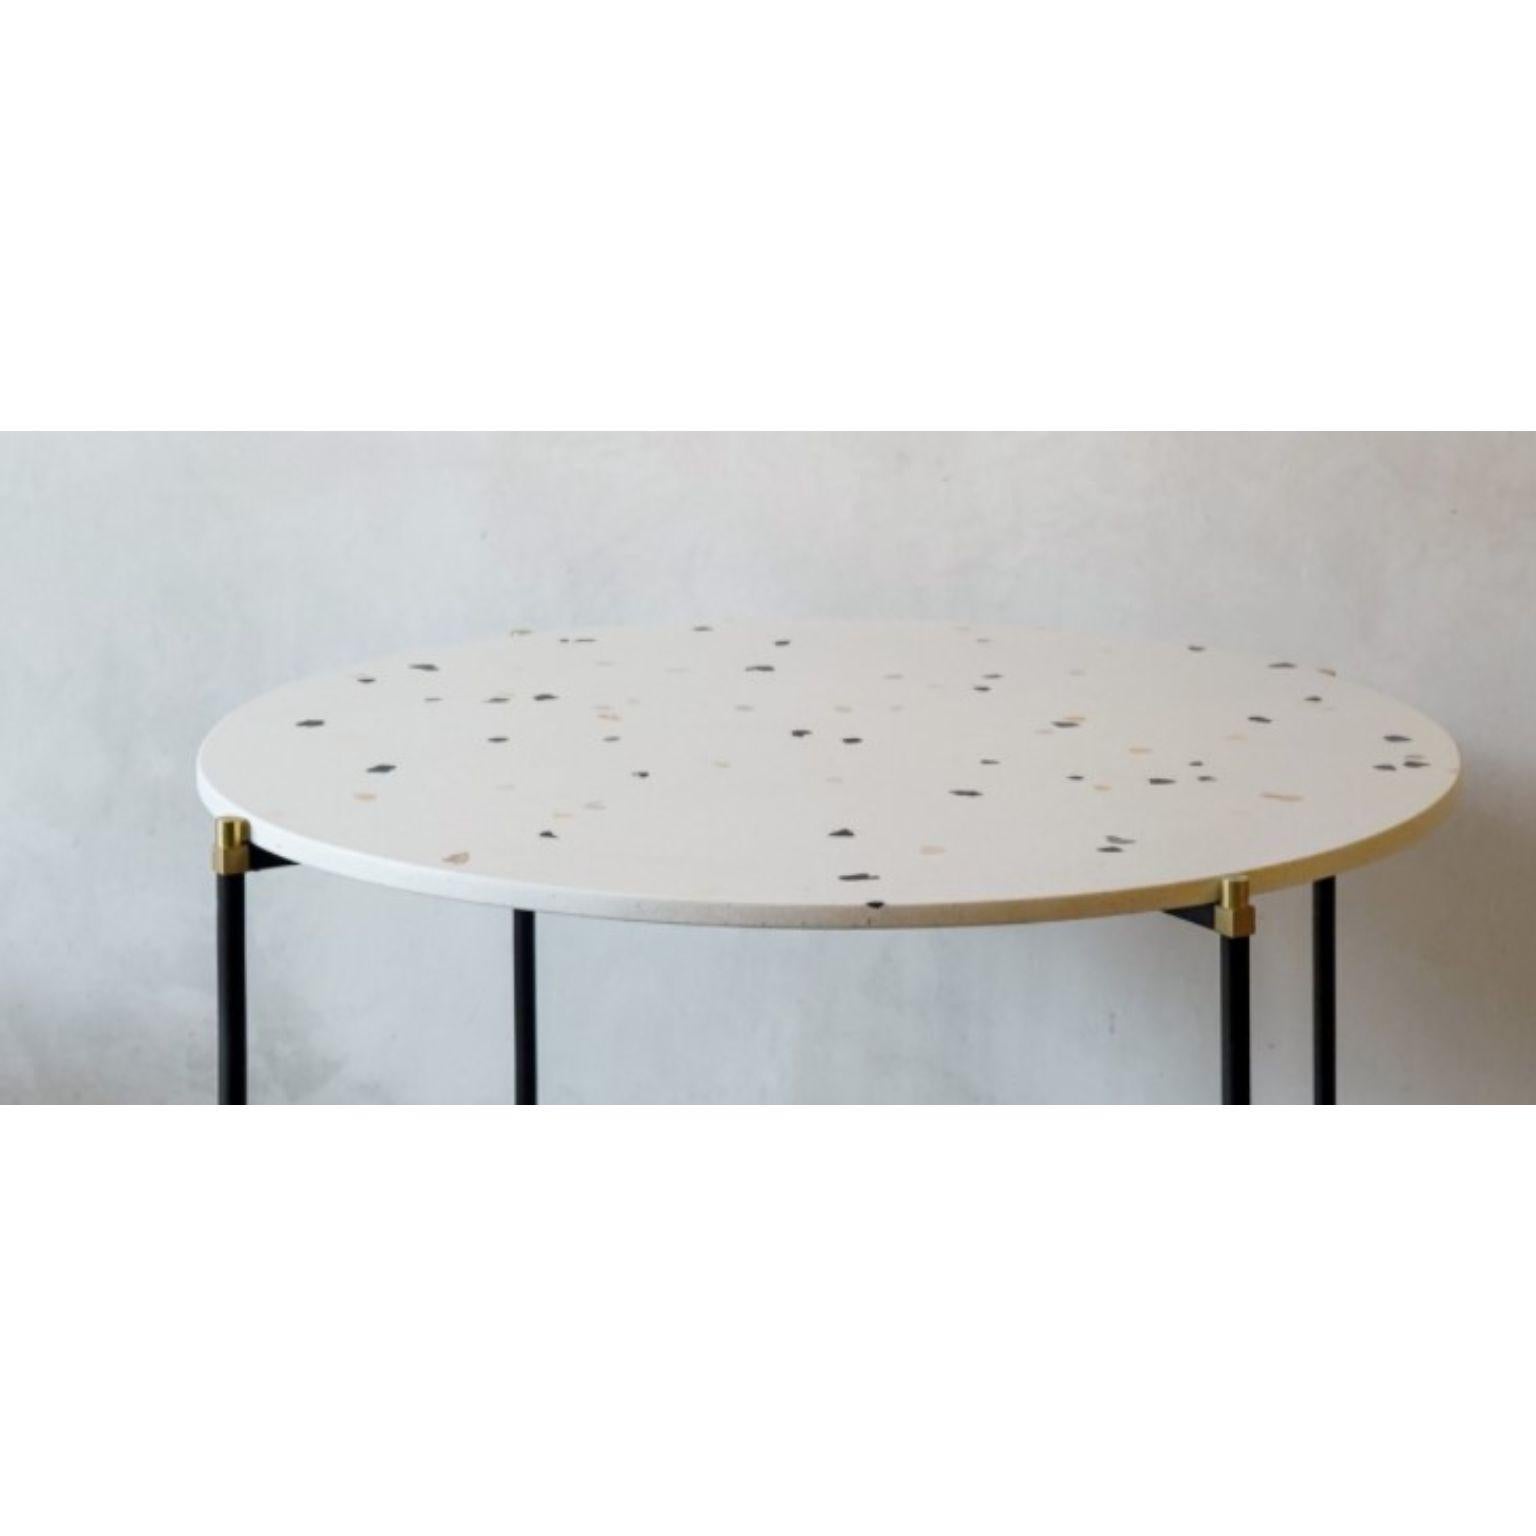 Post-Modern Simple Round Table 100 4 Legs by Contain